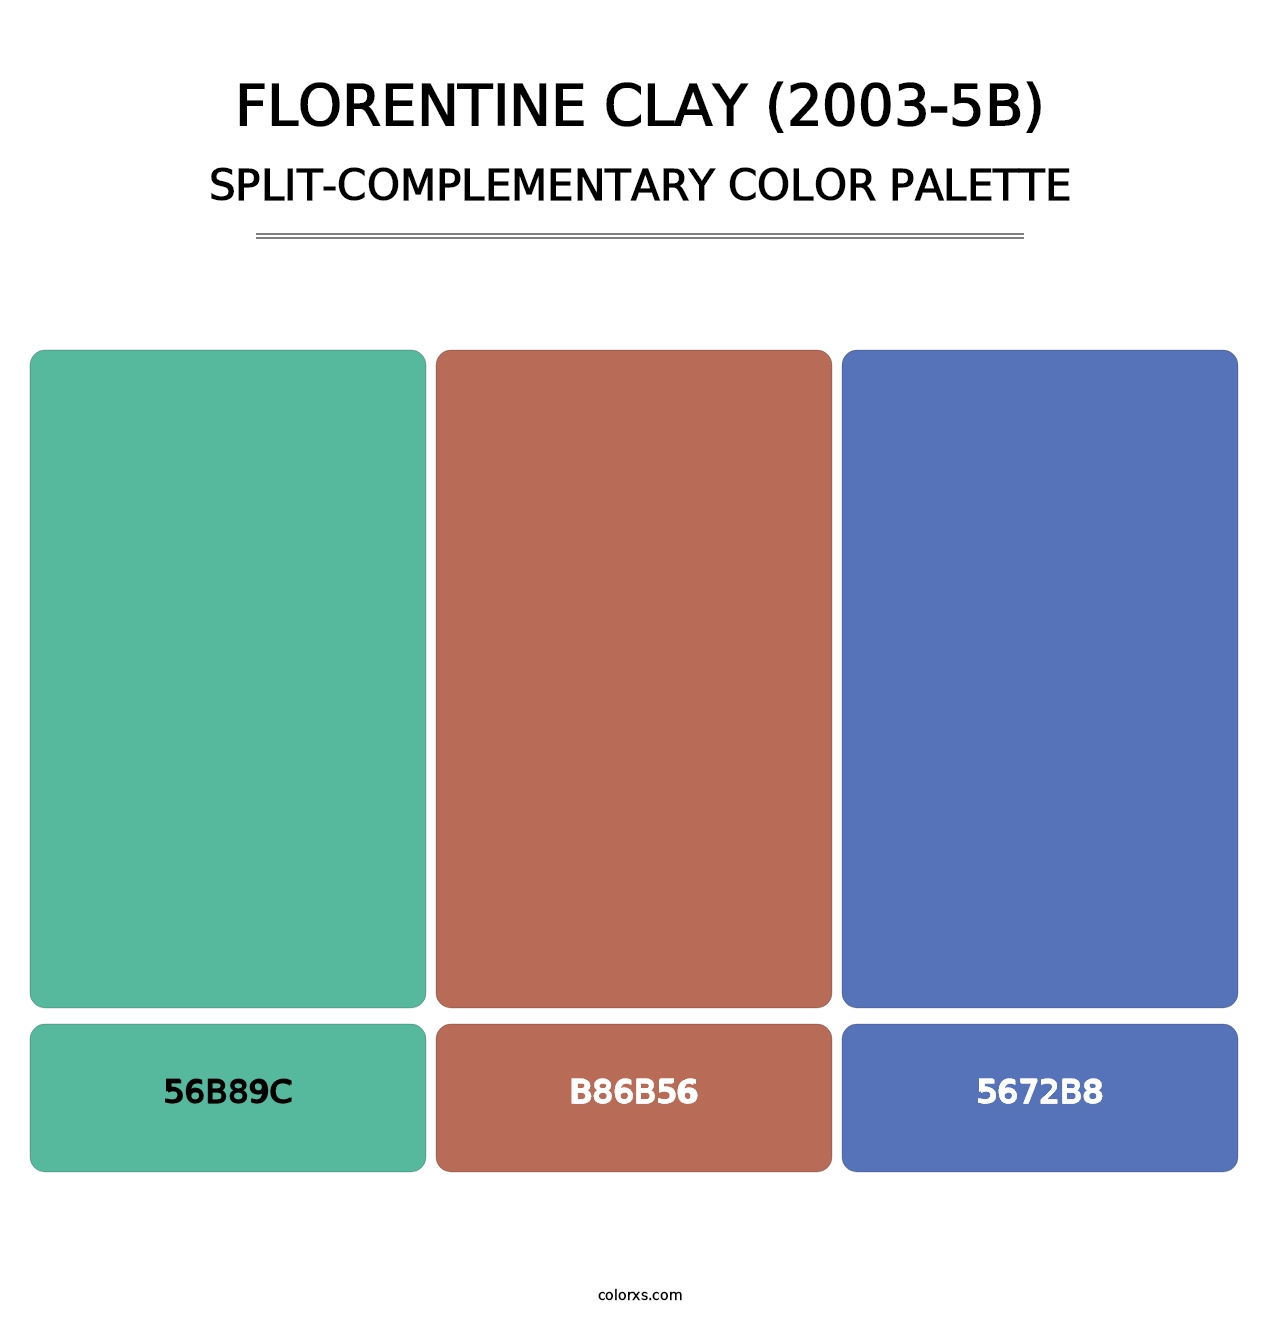 Florentine Clay (2003-5B) - Split-Complementary Color Palette